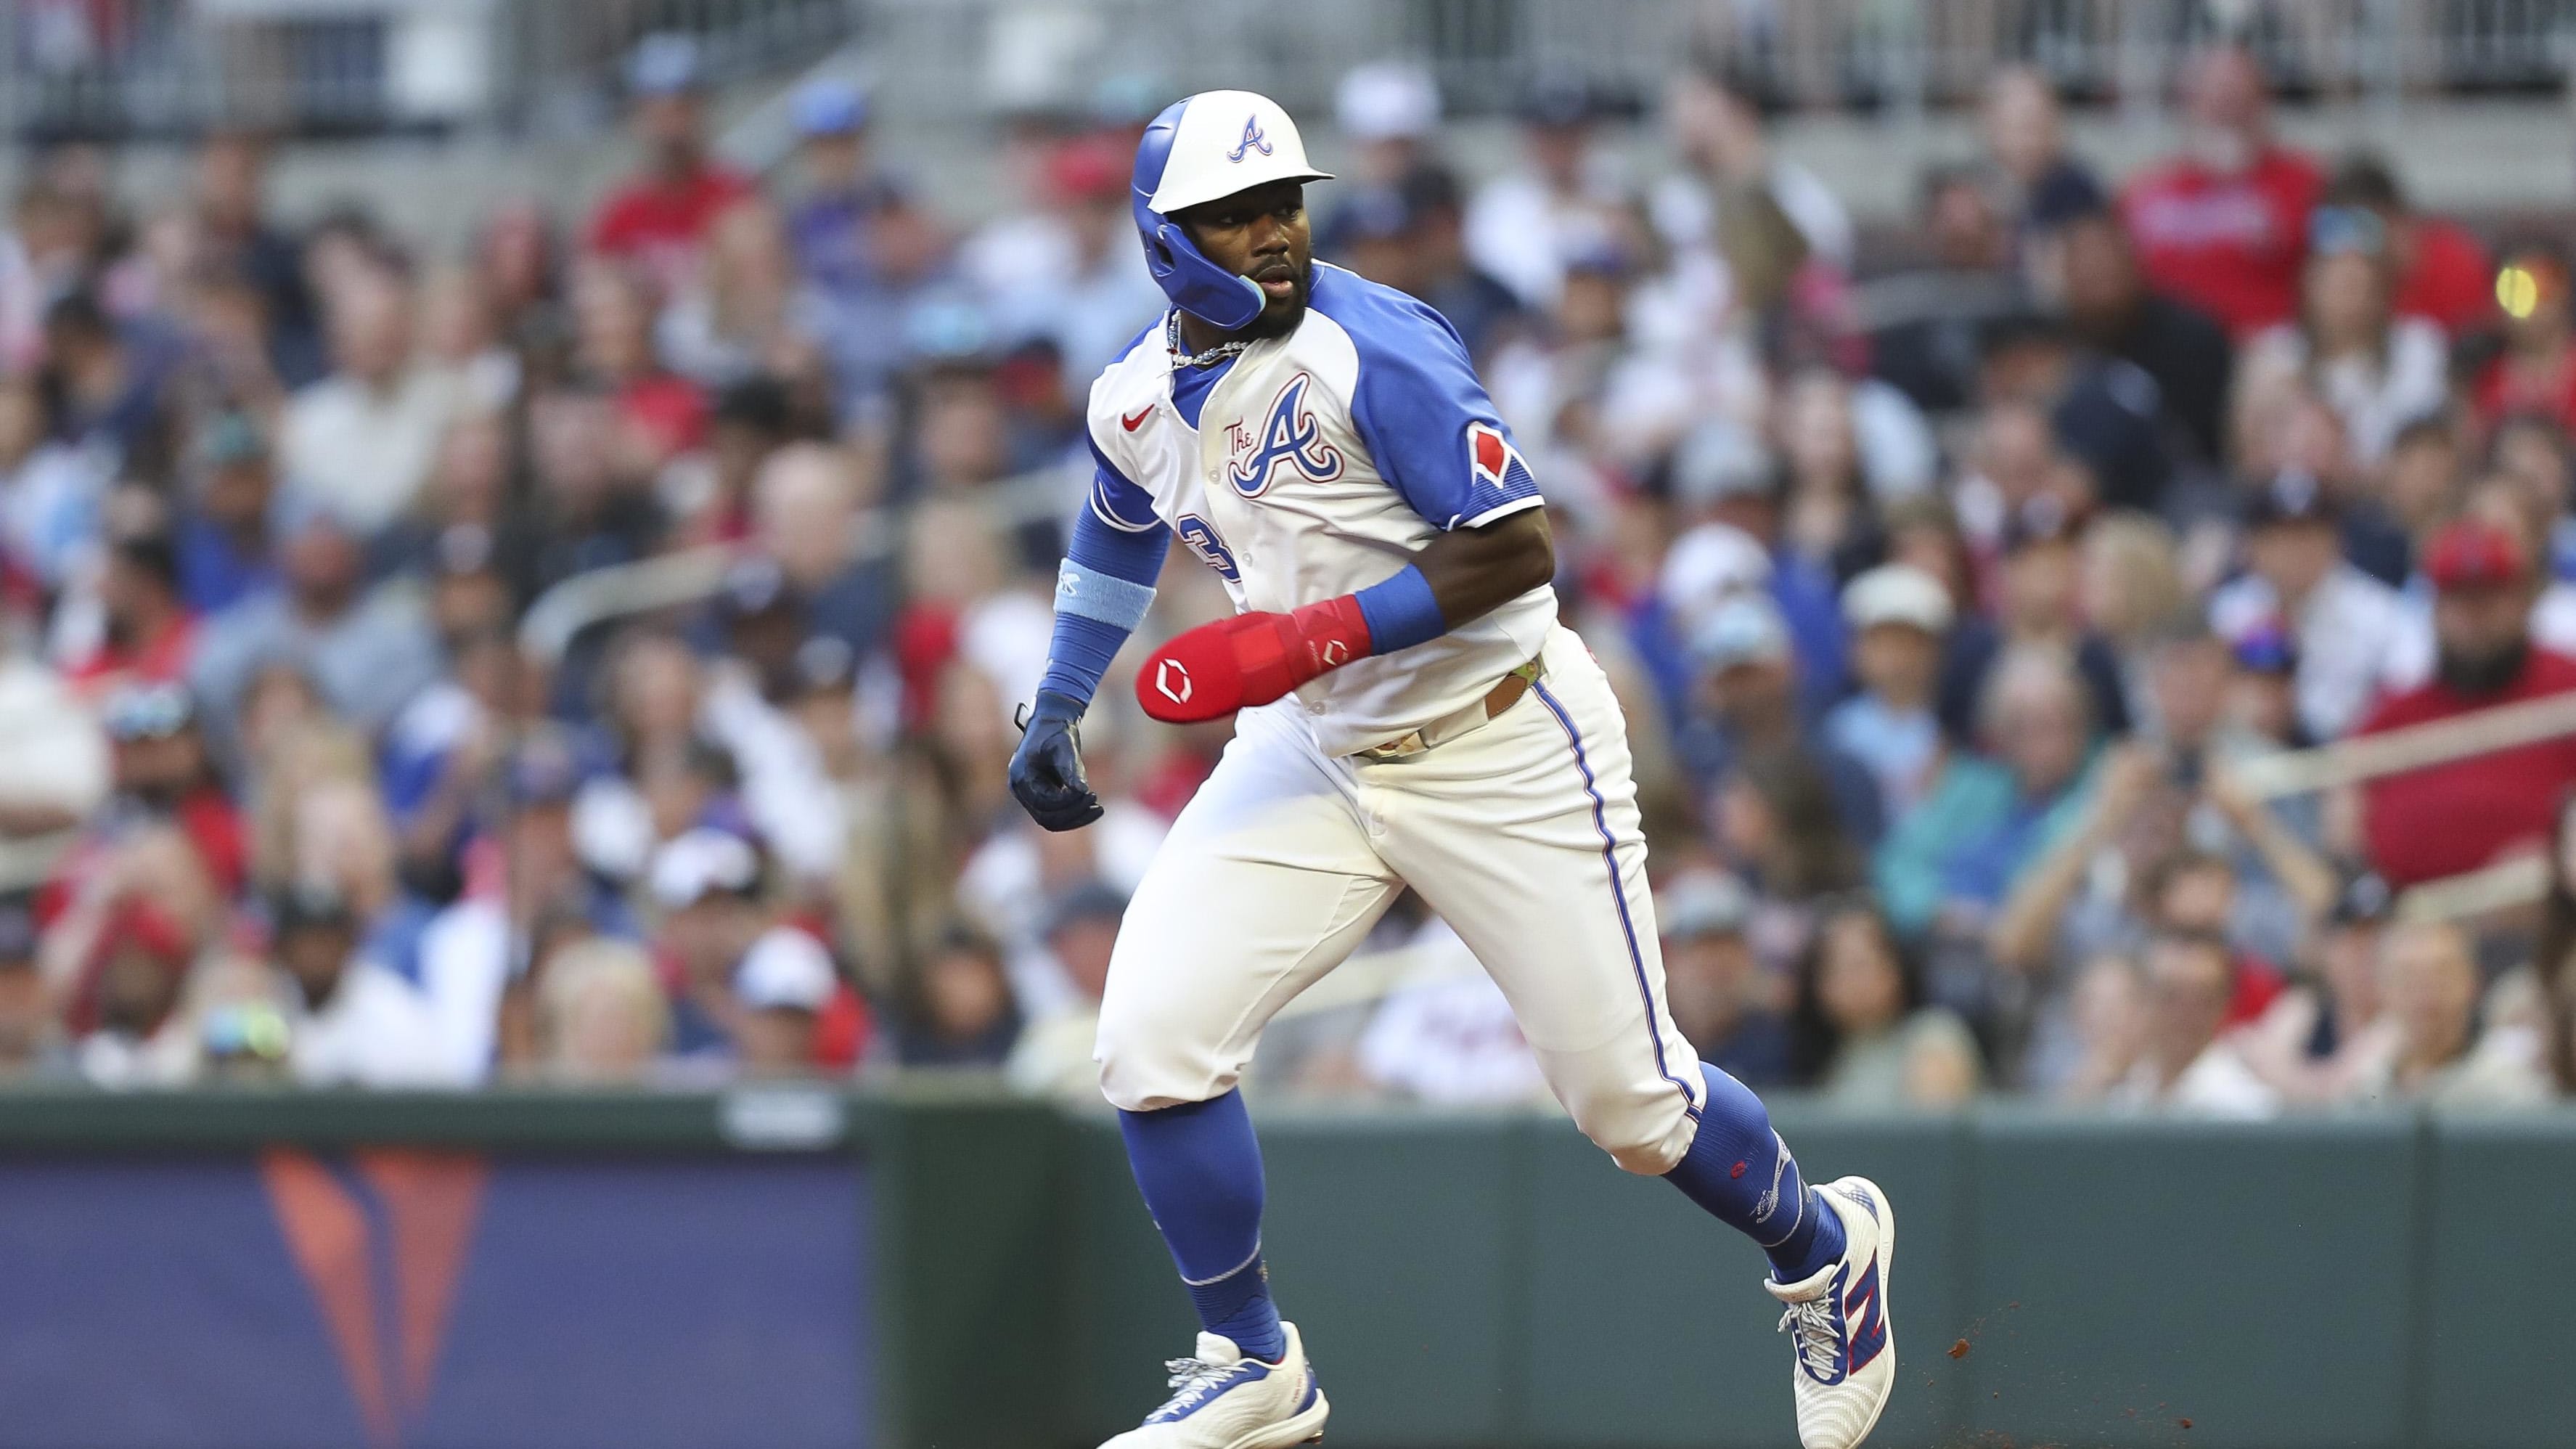 Atlanta Braves center fielder Michael Harris II went 3-for-5 with an RBI as the Braves took down the Texas Rangers on Saturday night in Truist Park